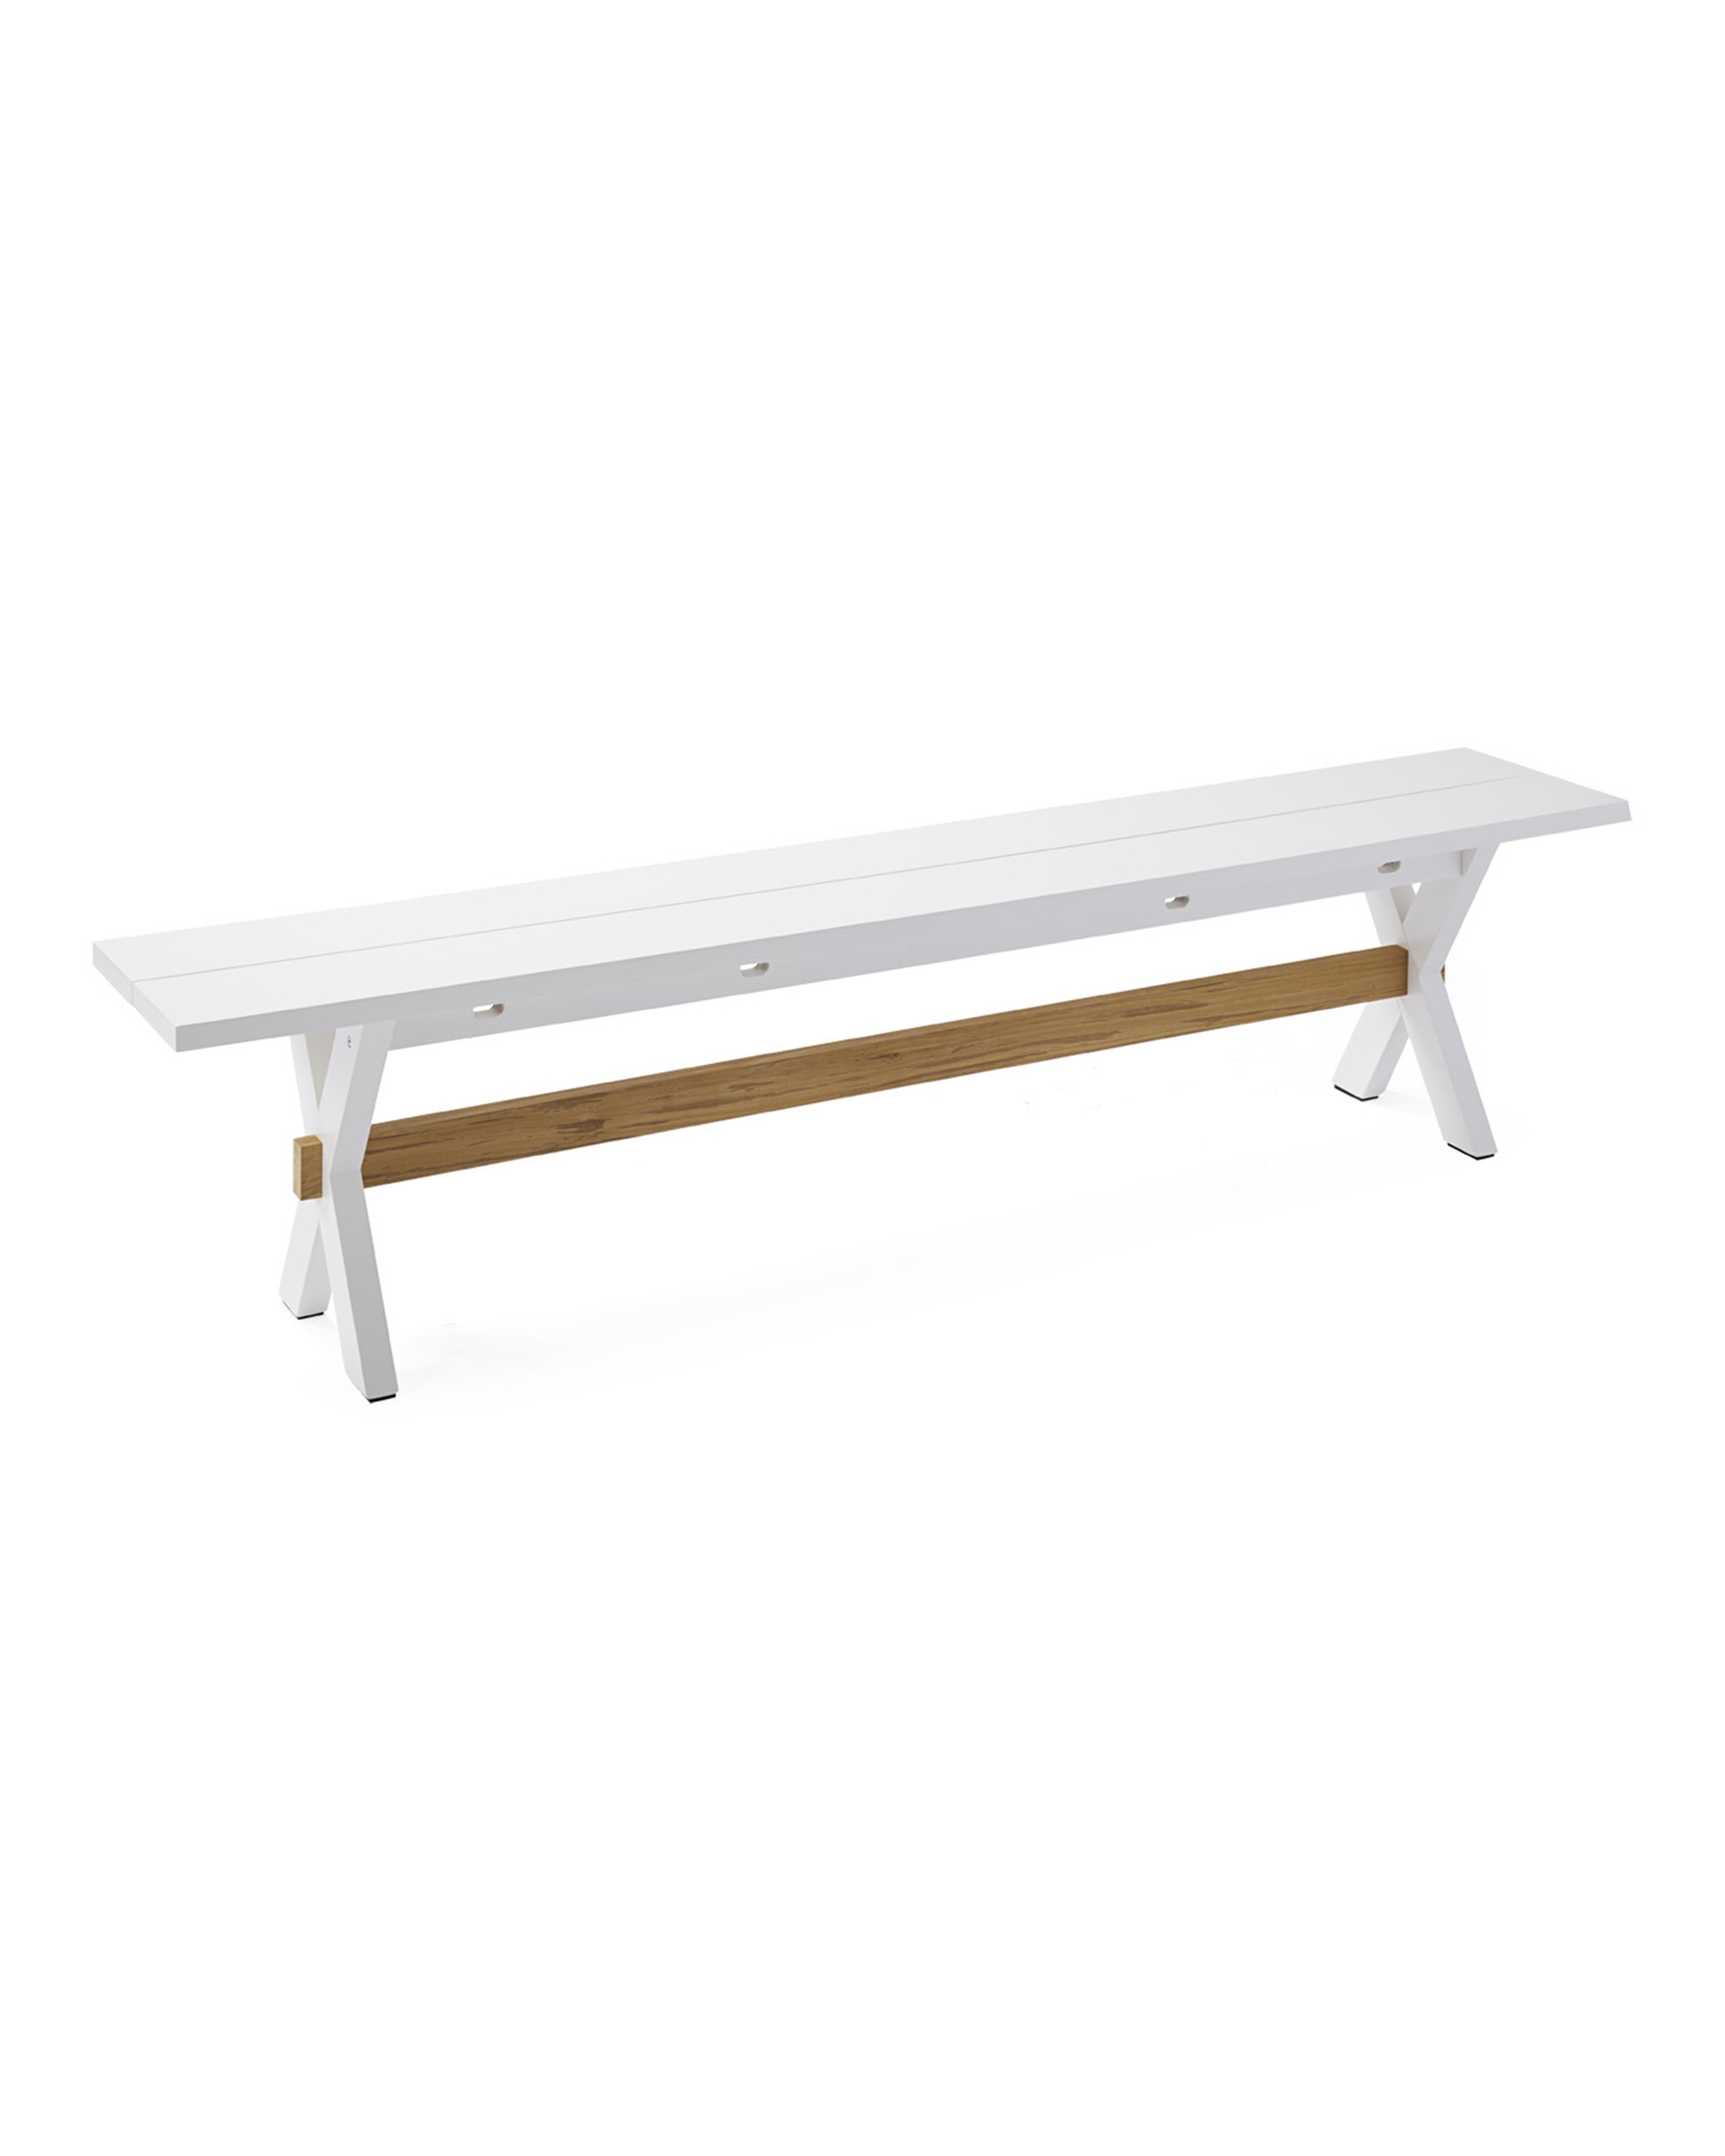 California Bench - White - Serena and Lily